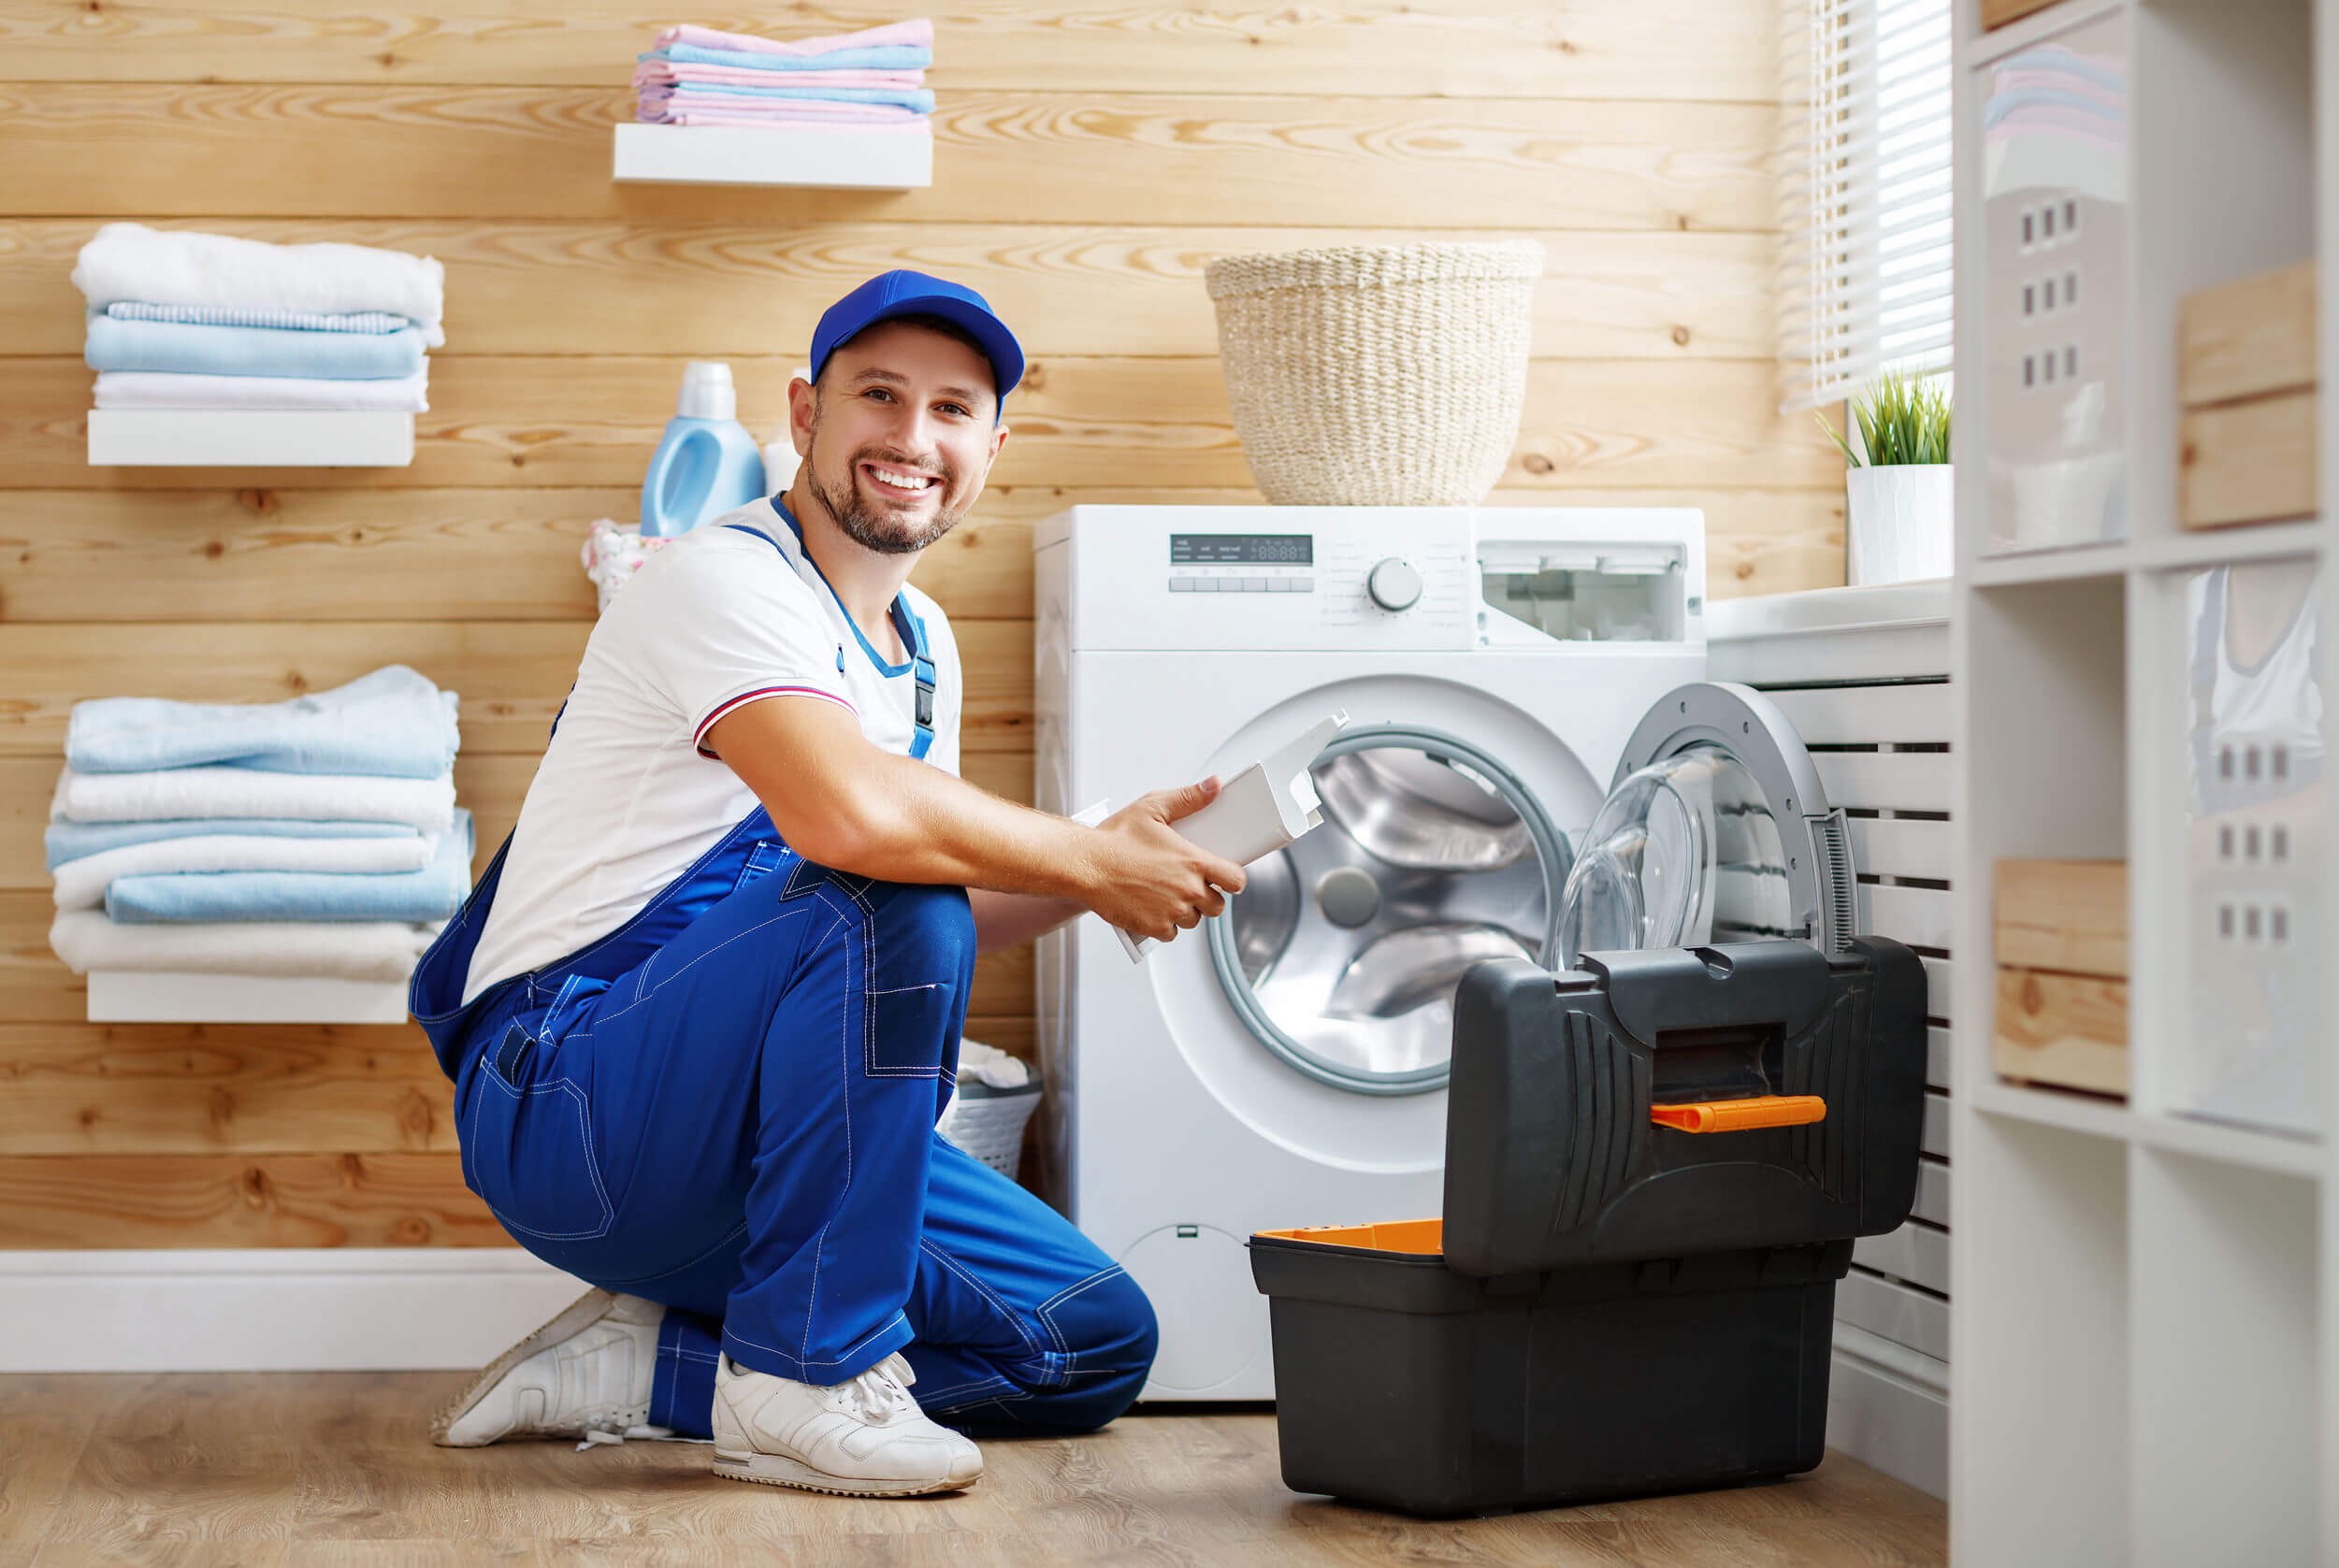 Guide to finding the right professional for appliance repair